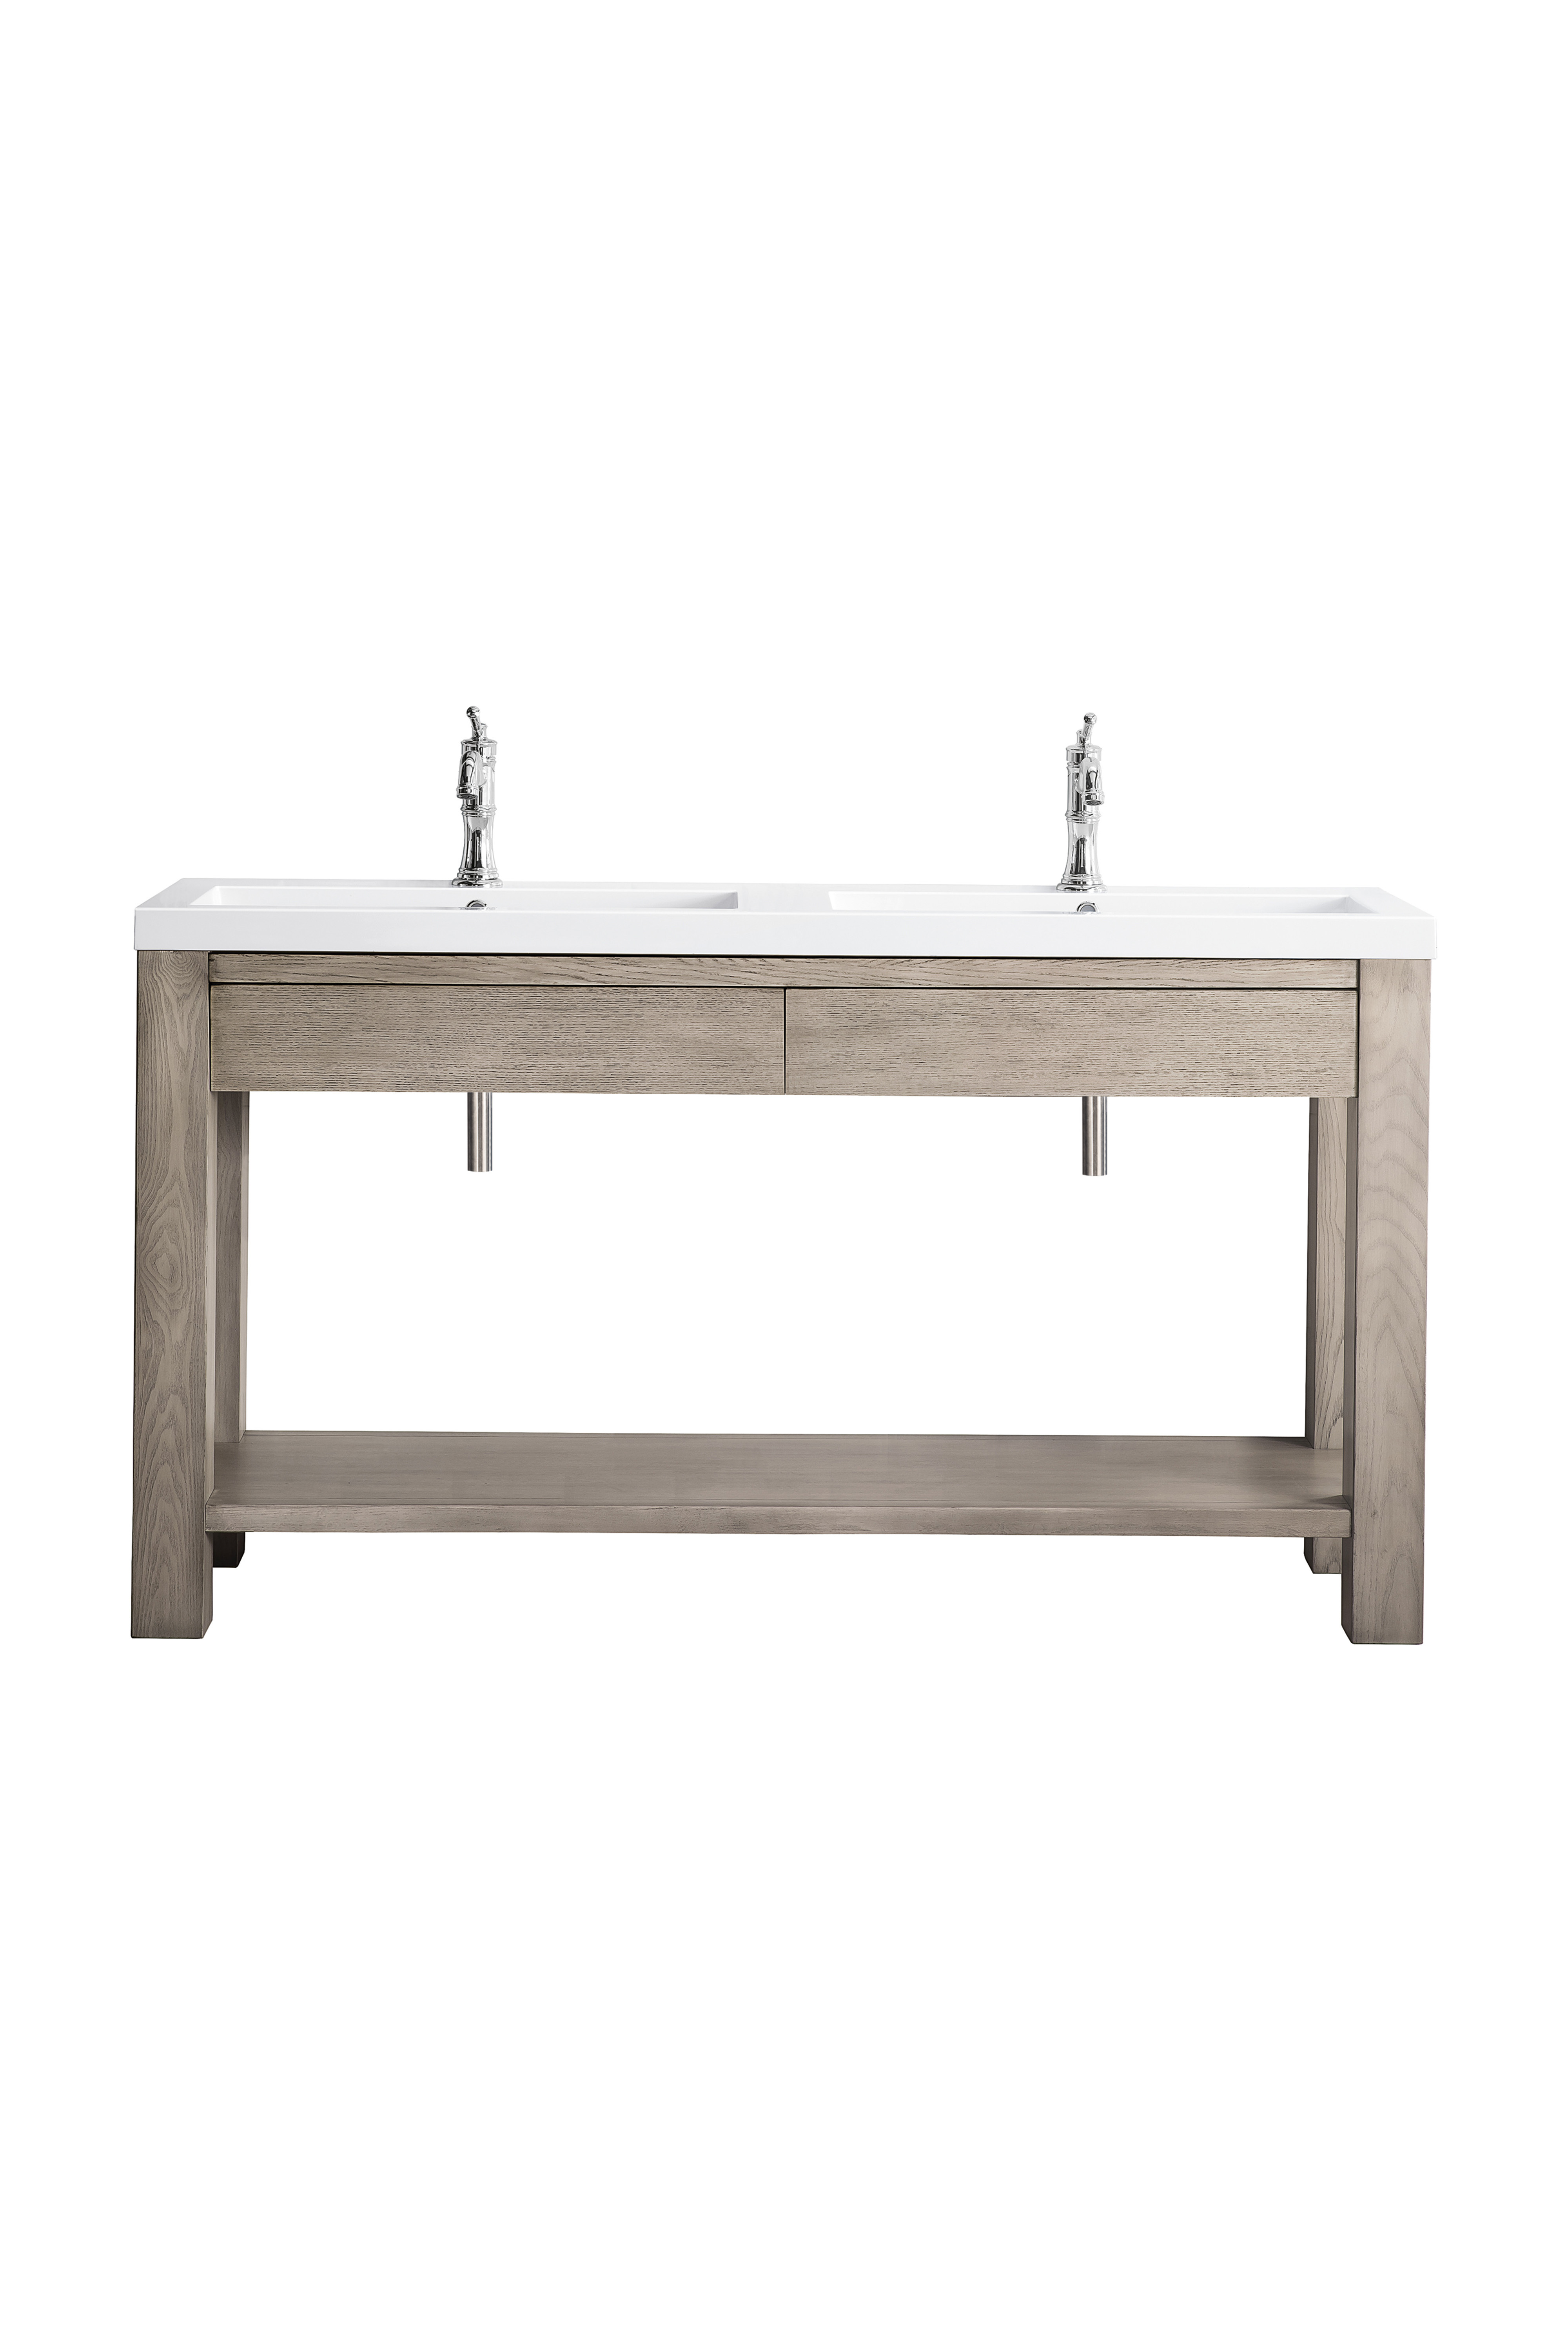 James Martin C205V63PTAWG Brooklyn 63" Wooden Sink Console, Platinum Ash w/ White Glossy Composite Countertop